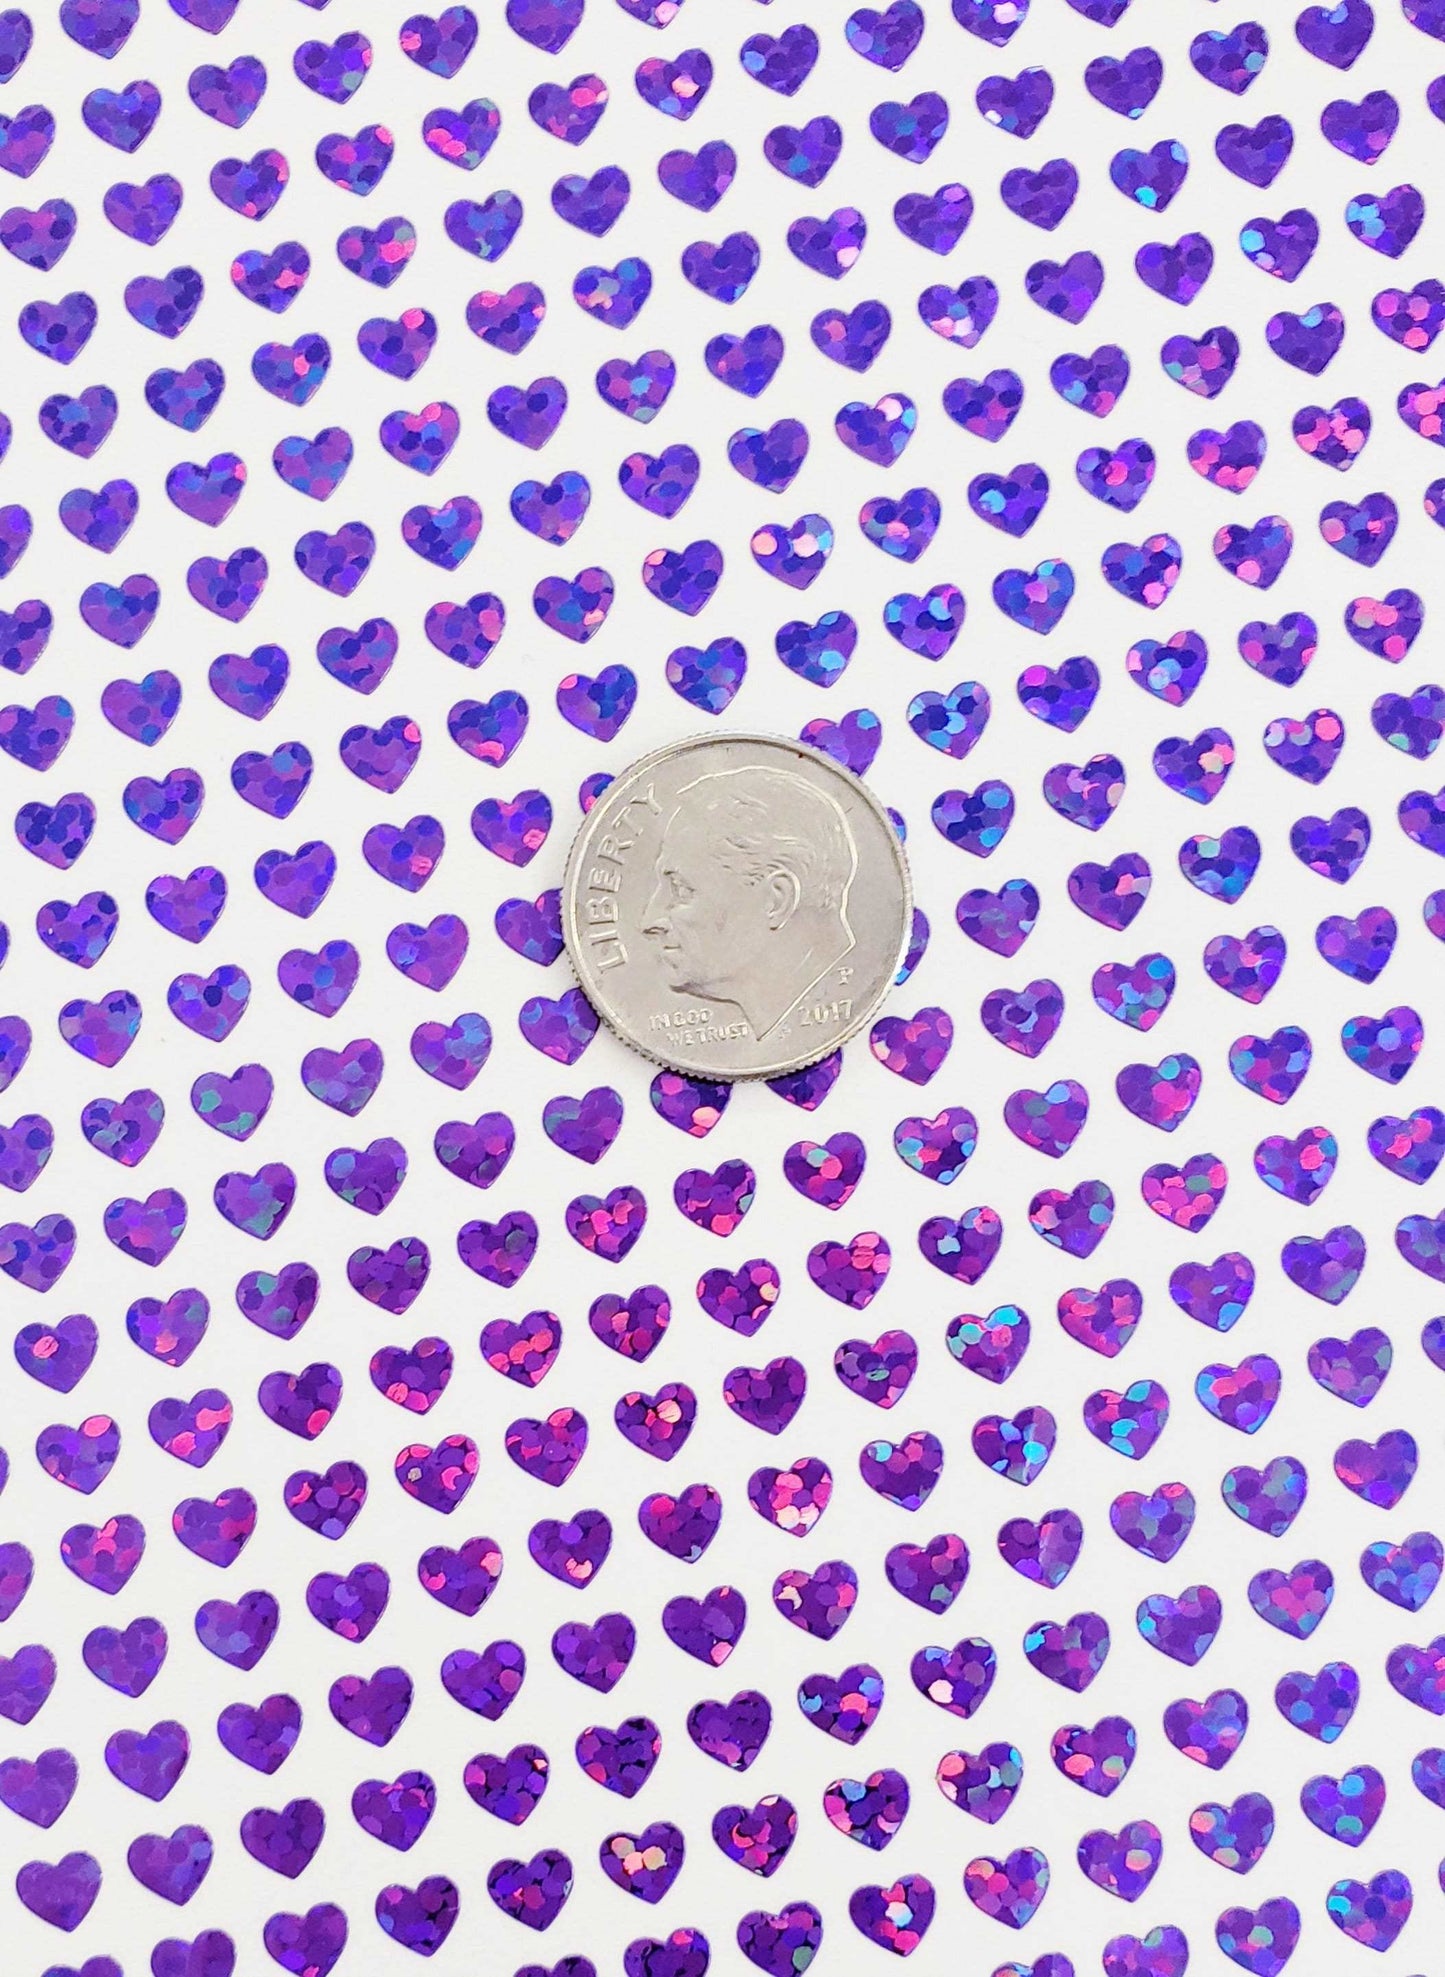 Heart Stickers, set of 640 extra small purple glitter heart stickers for bullet journals, notebooks, toploader card sleeves and planners.